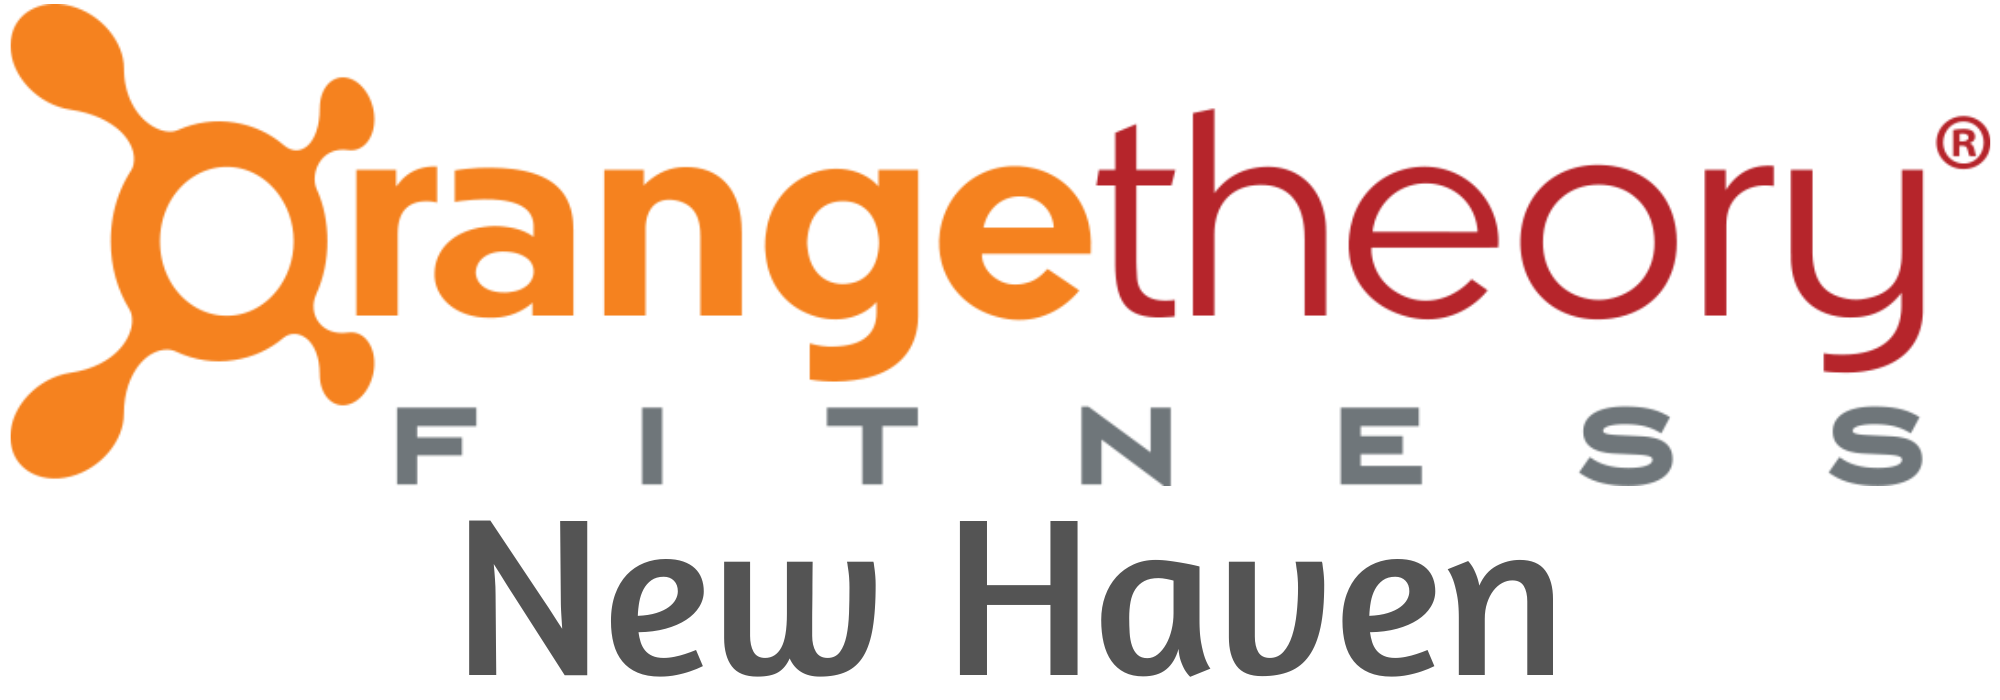 New Haven logo (clear background).png